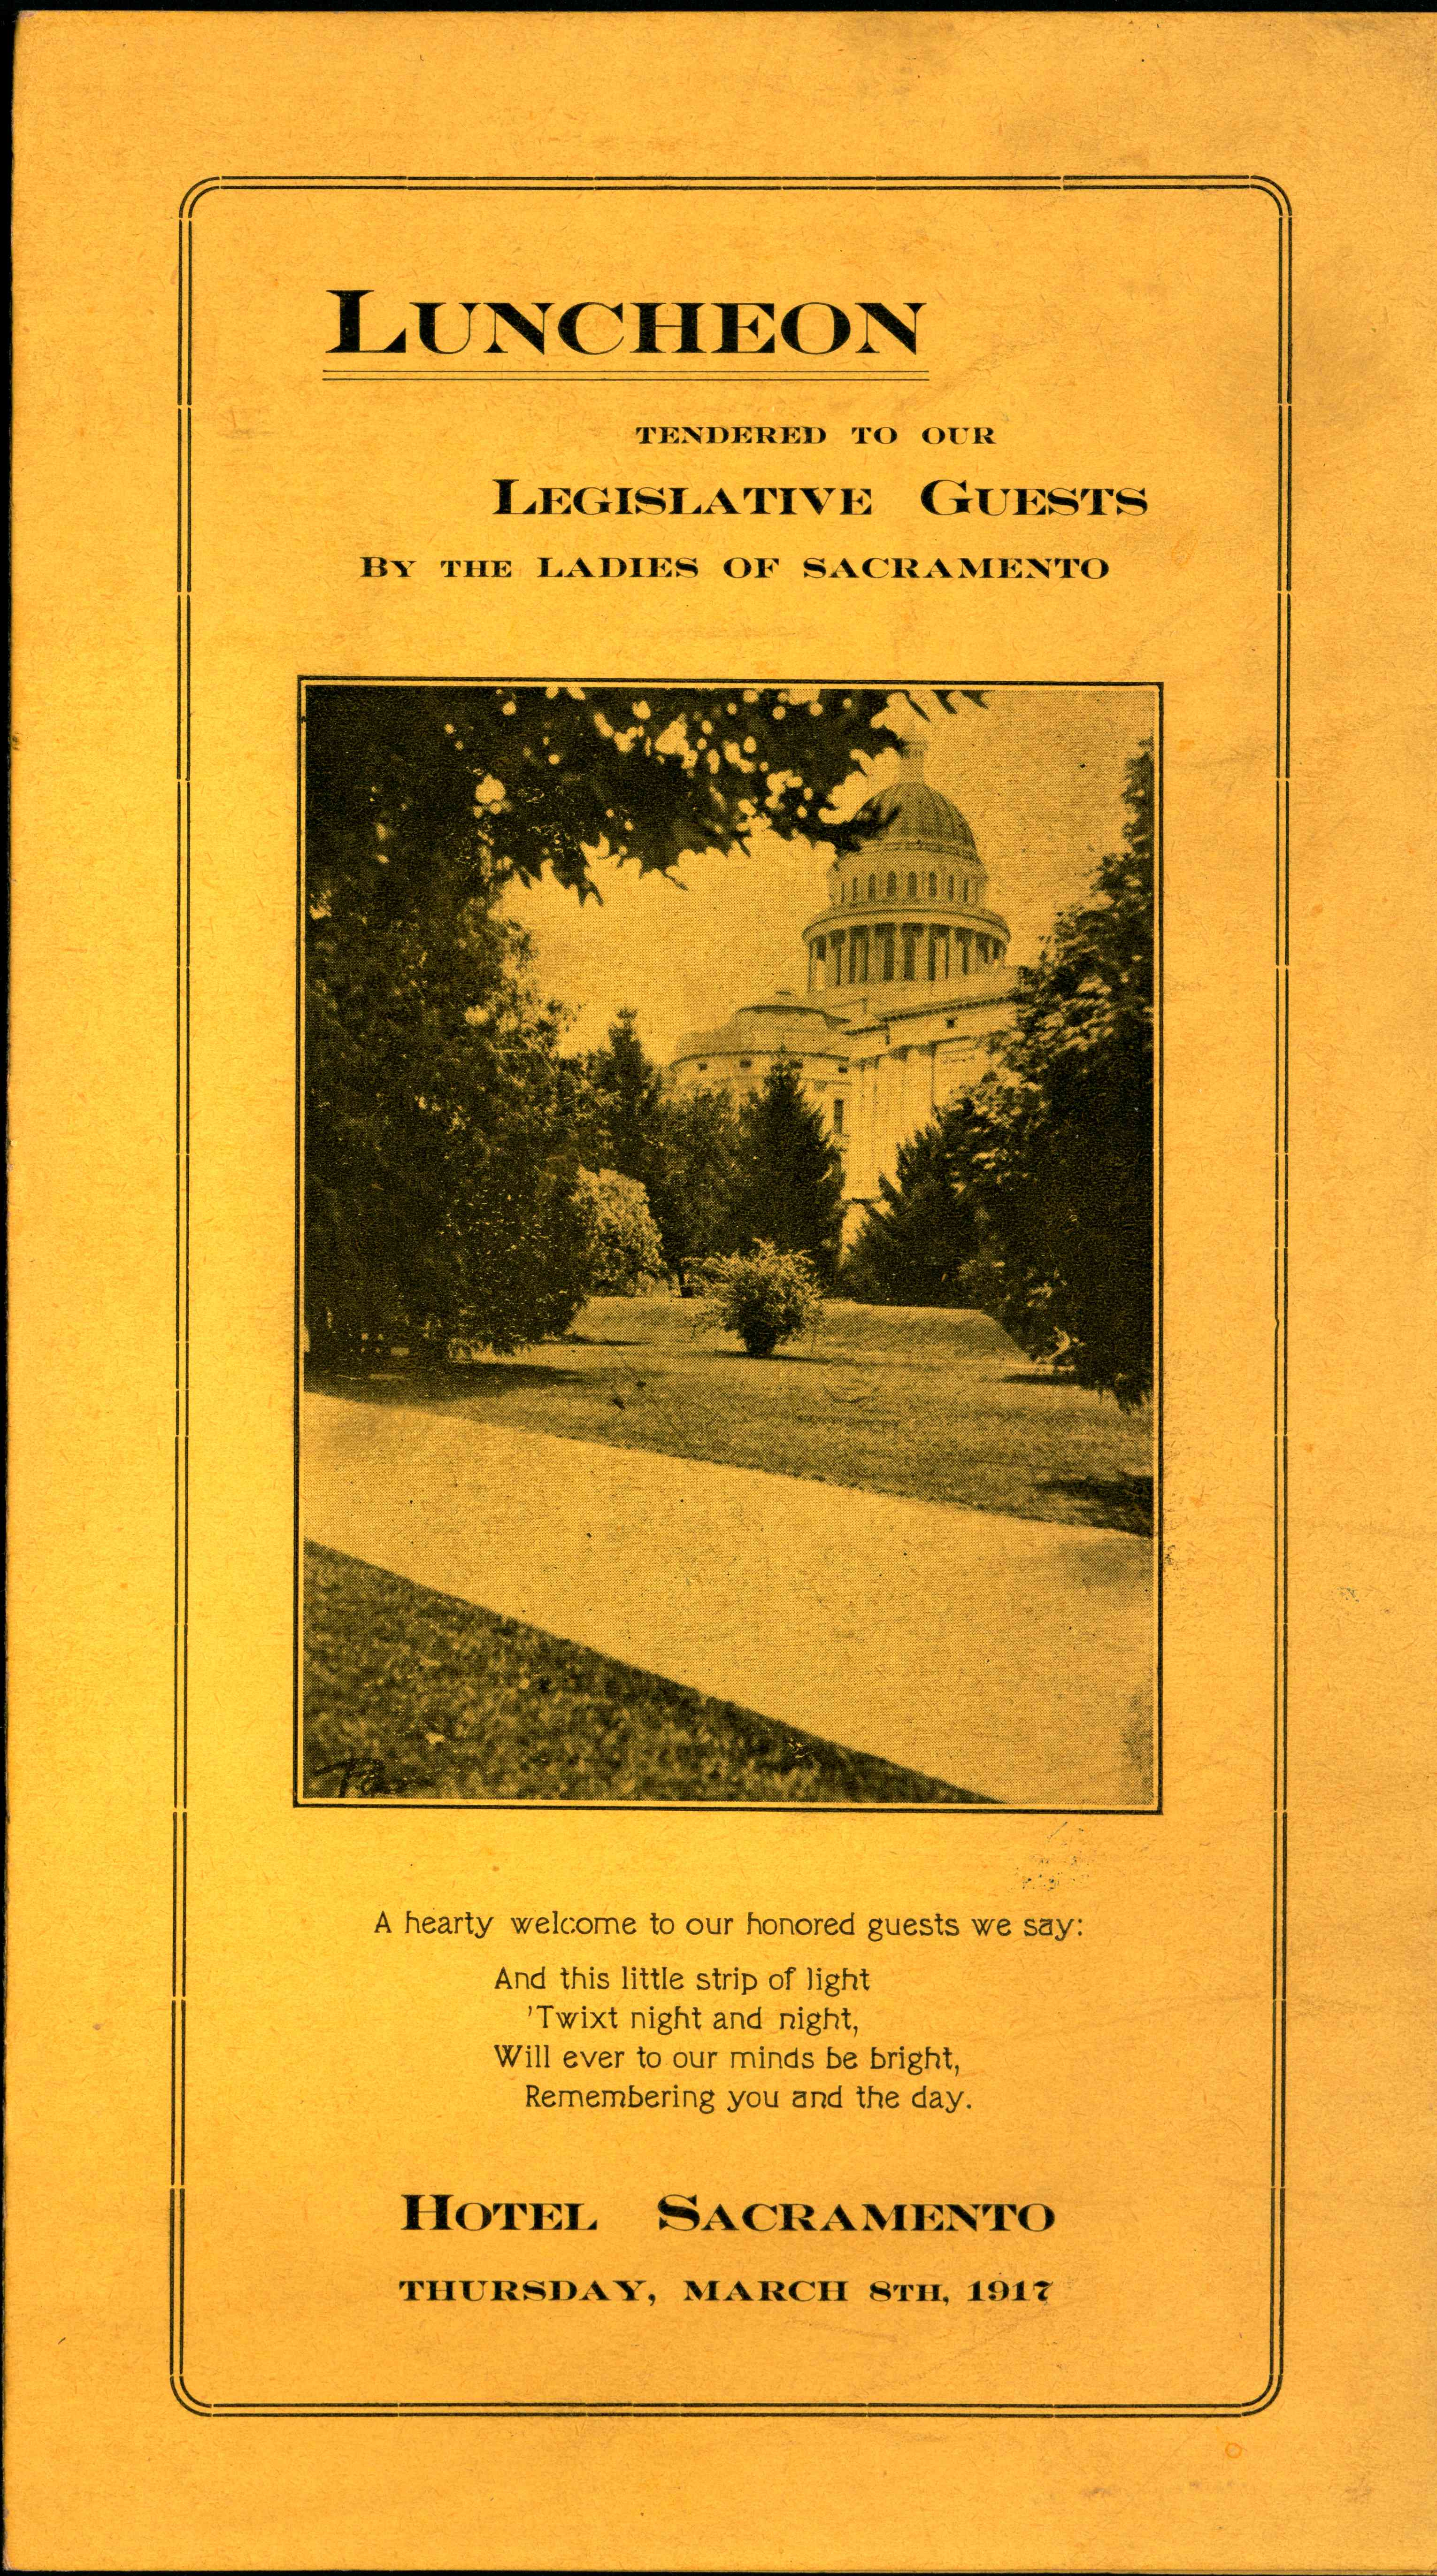 A picture of the Sacramento Capital on the front of the menu